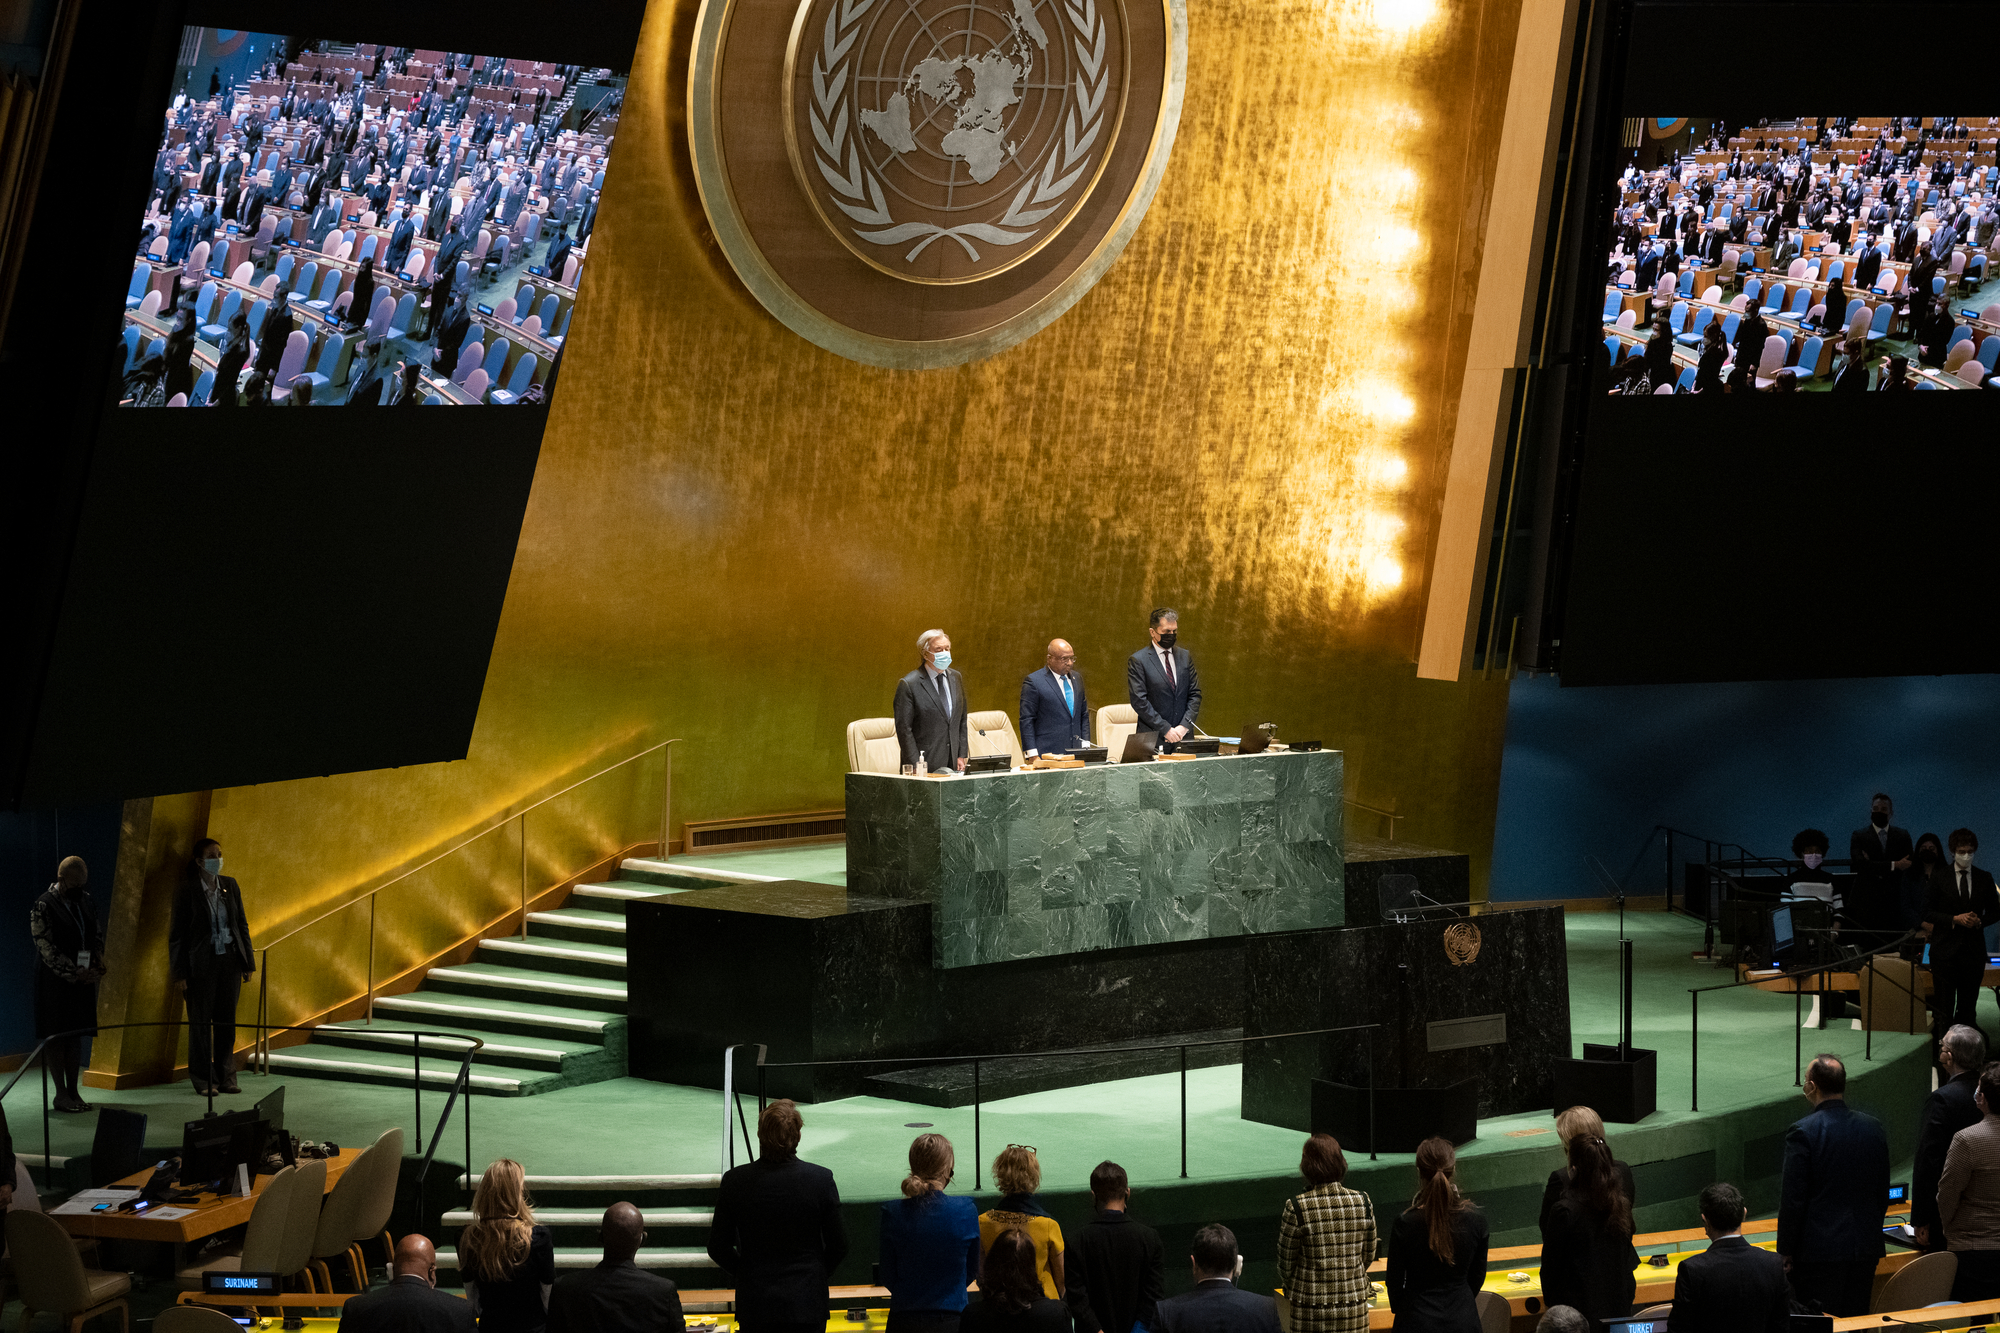 The General Assembly stands for a moment of silence during the first plenary meeting of the eleventh General Assembly Emergency Special Session on Ukraine. At dais are, from left to right: Secretary-General António Guterres; Abdulla Shahid, President of the seventy-sixth session of the United Nations General Assembly, and Movses Abelian, Under-Secretary-General for General Assembly and Conference Management (DGACM).